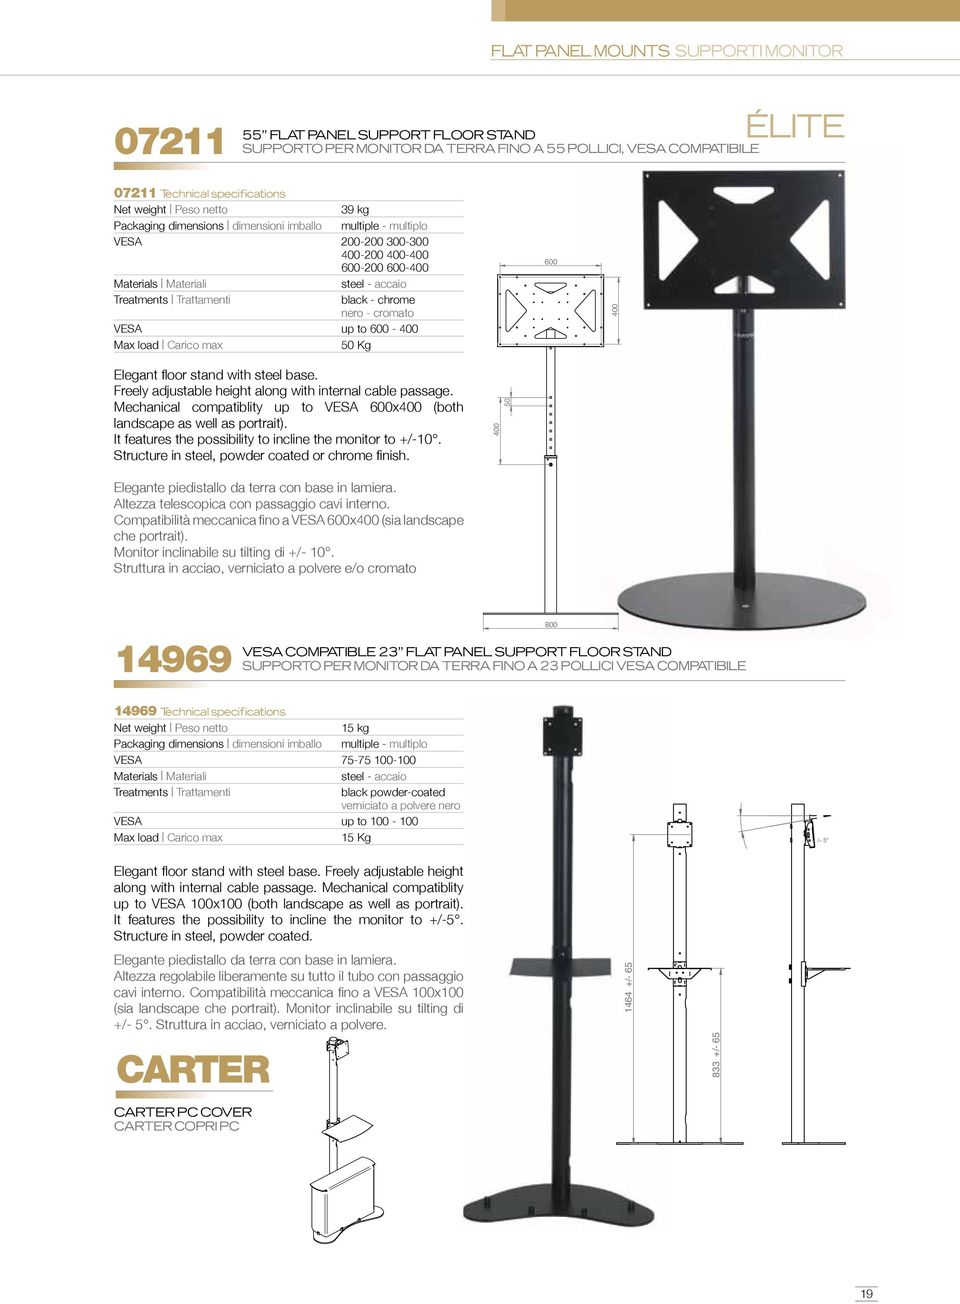 +/- 10 600 400 Elegant floor stand with steel base. Freely adjustable height along with internal cable passage. Mechanical compatiblity up to VESA 600x400 (both landscape as well as portrait).